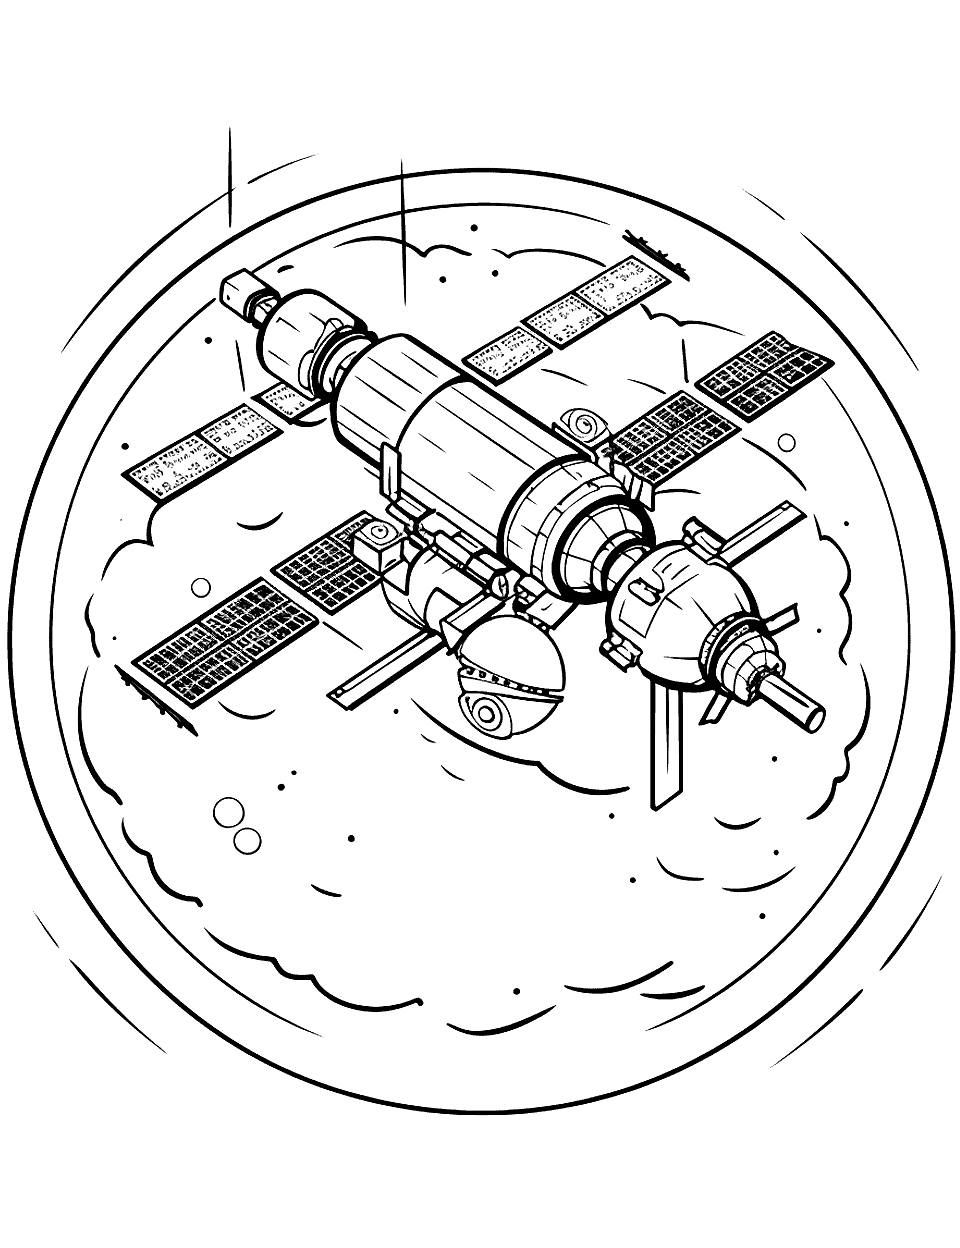 International Space Station Solar System Coloring Page - The International Space Station orbiting a planet.